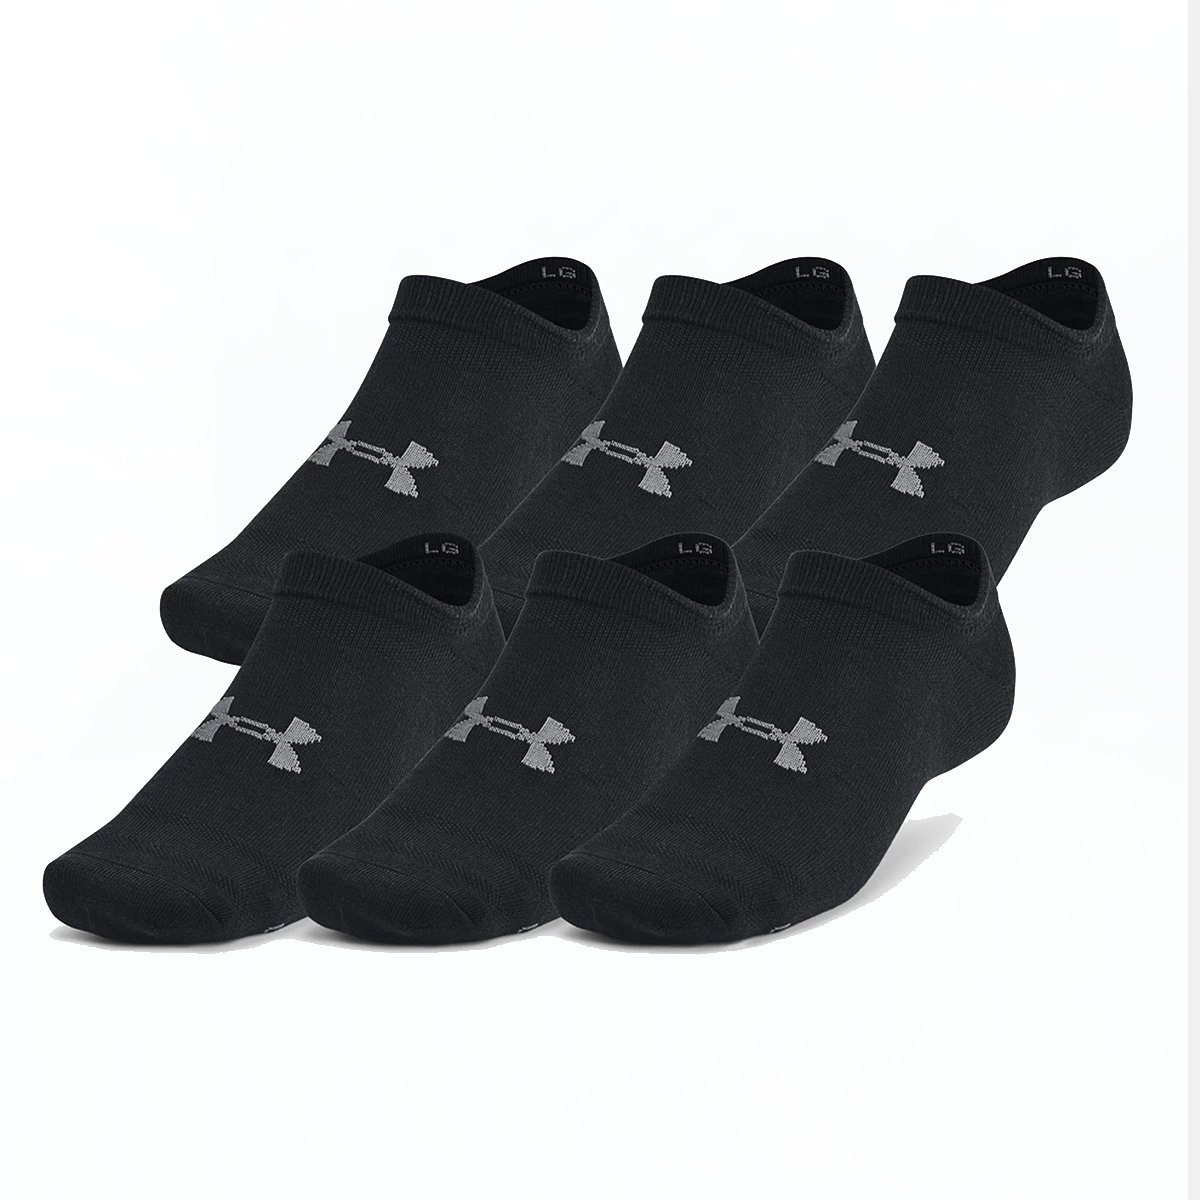 Calcetines Under Armour Performance Tech 1379512-001